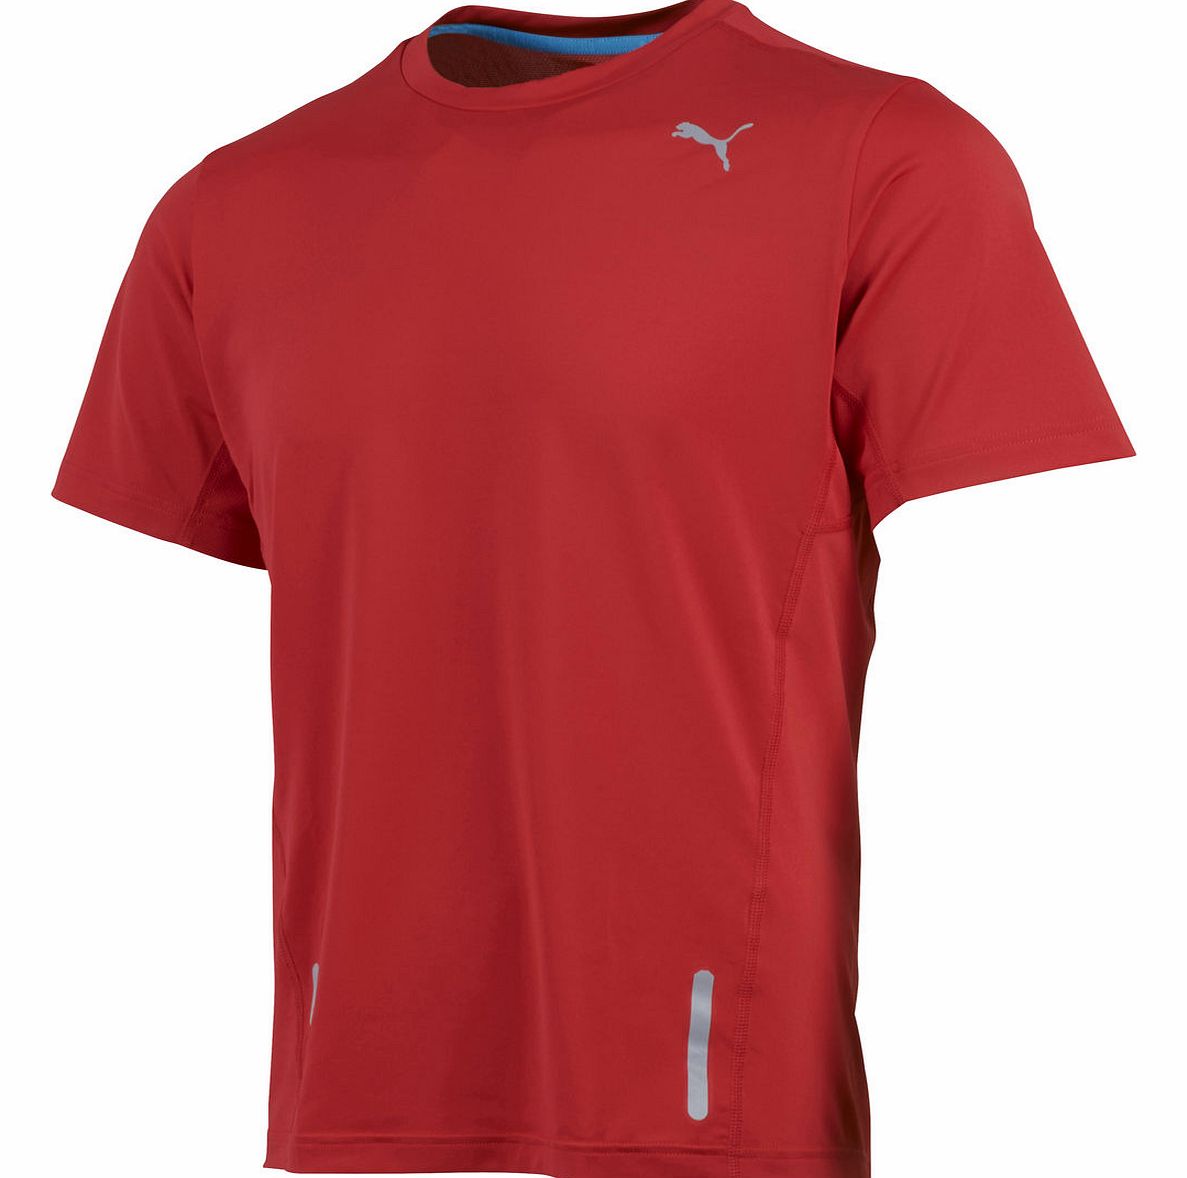 Puma Pure Fitted T-Shirt - AW14 Running Short